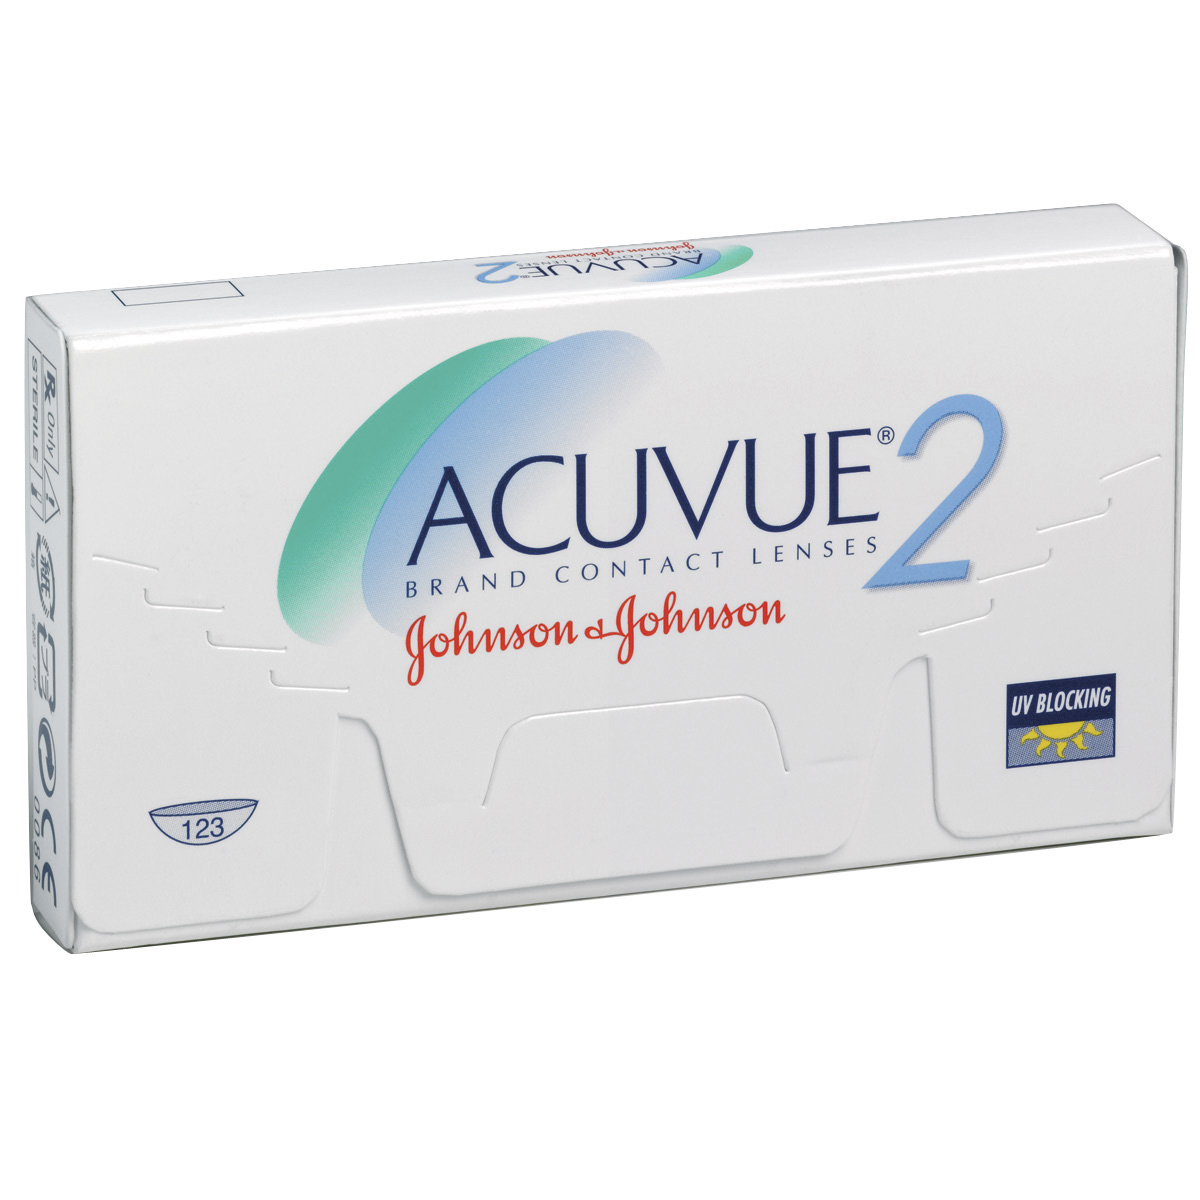 Image of Acuvue 2 6 lenses